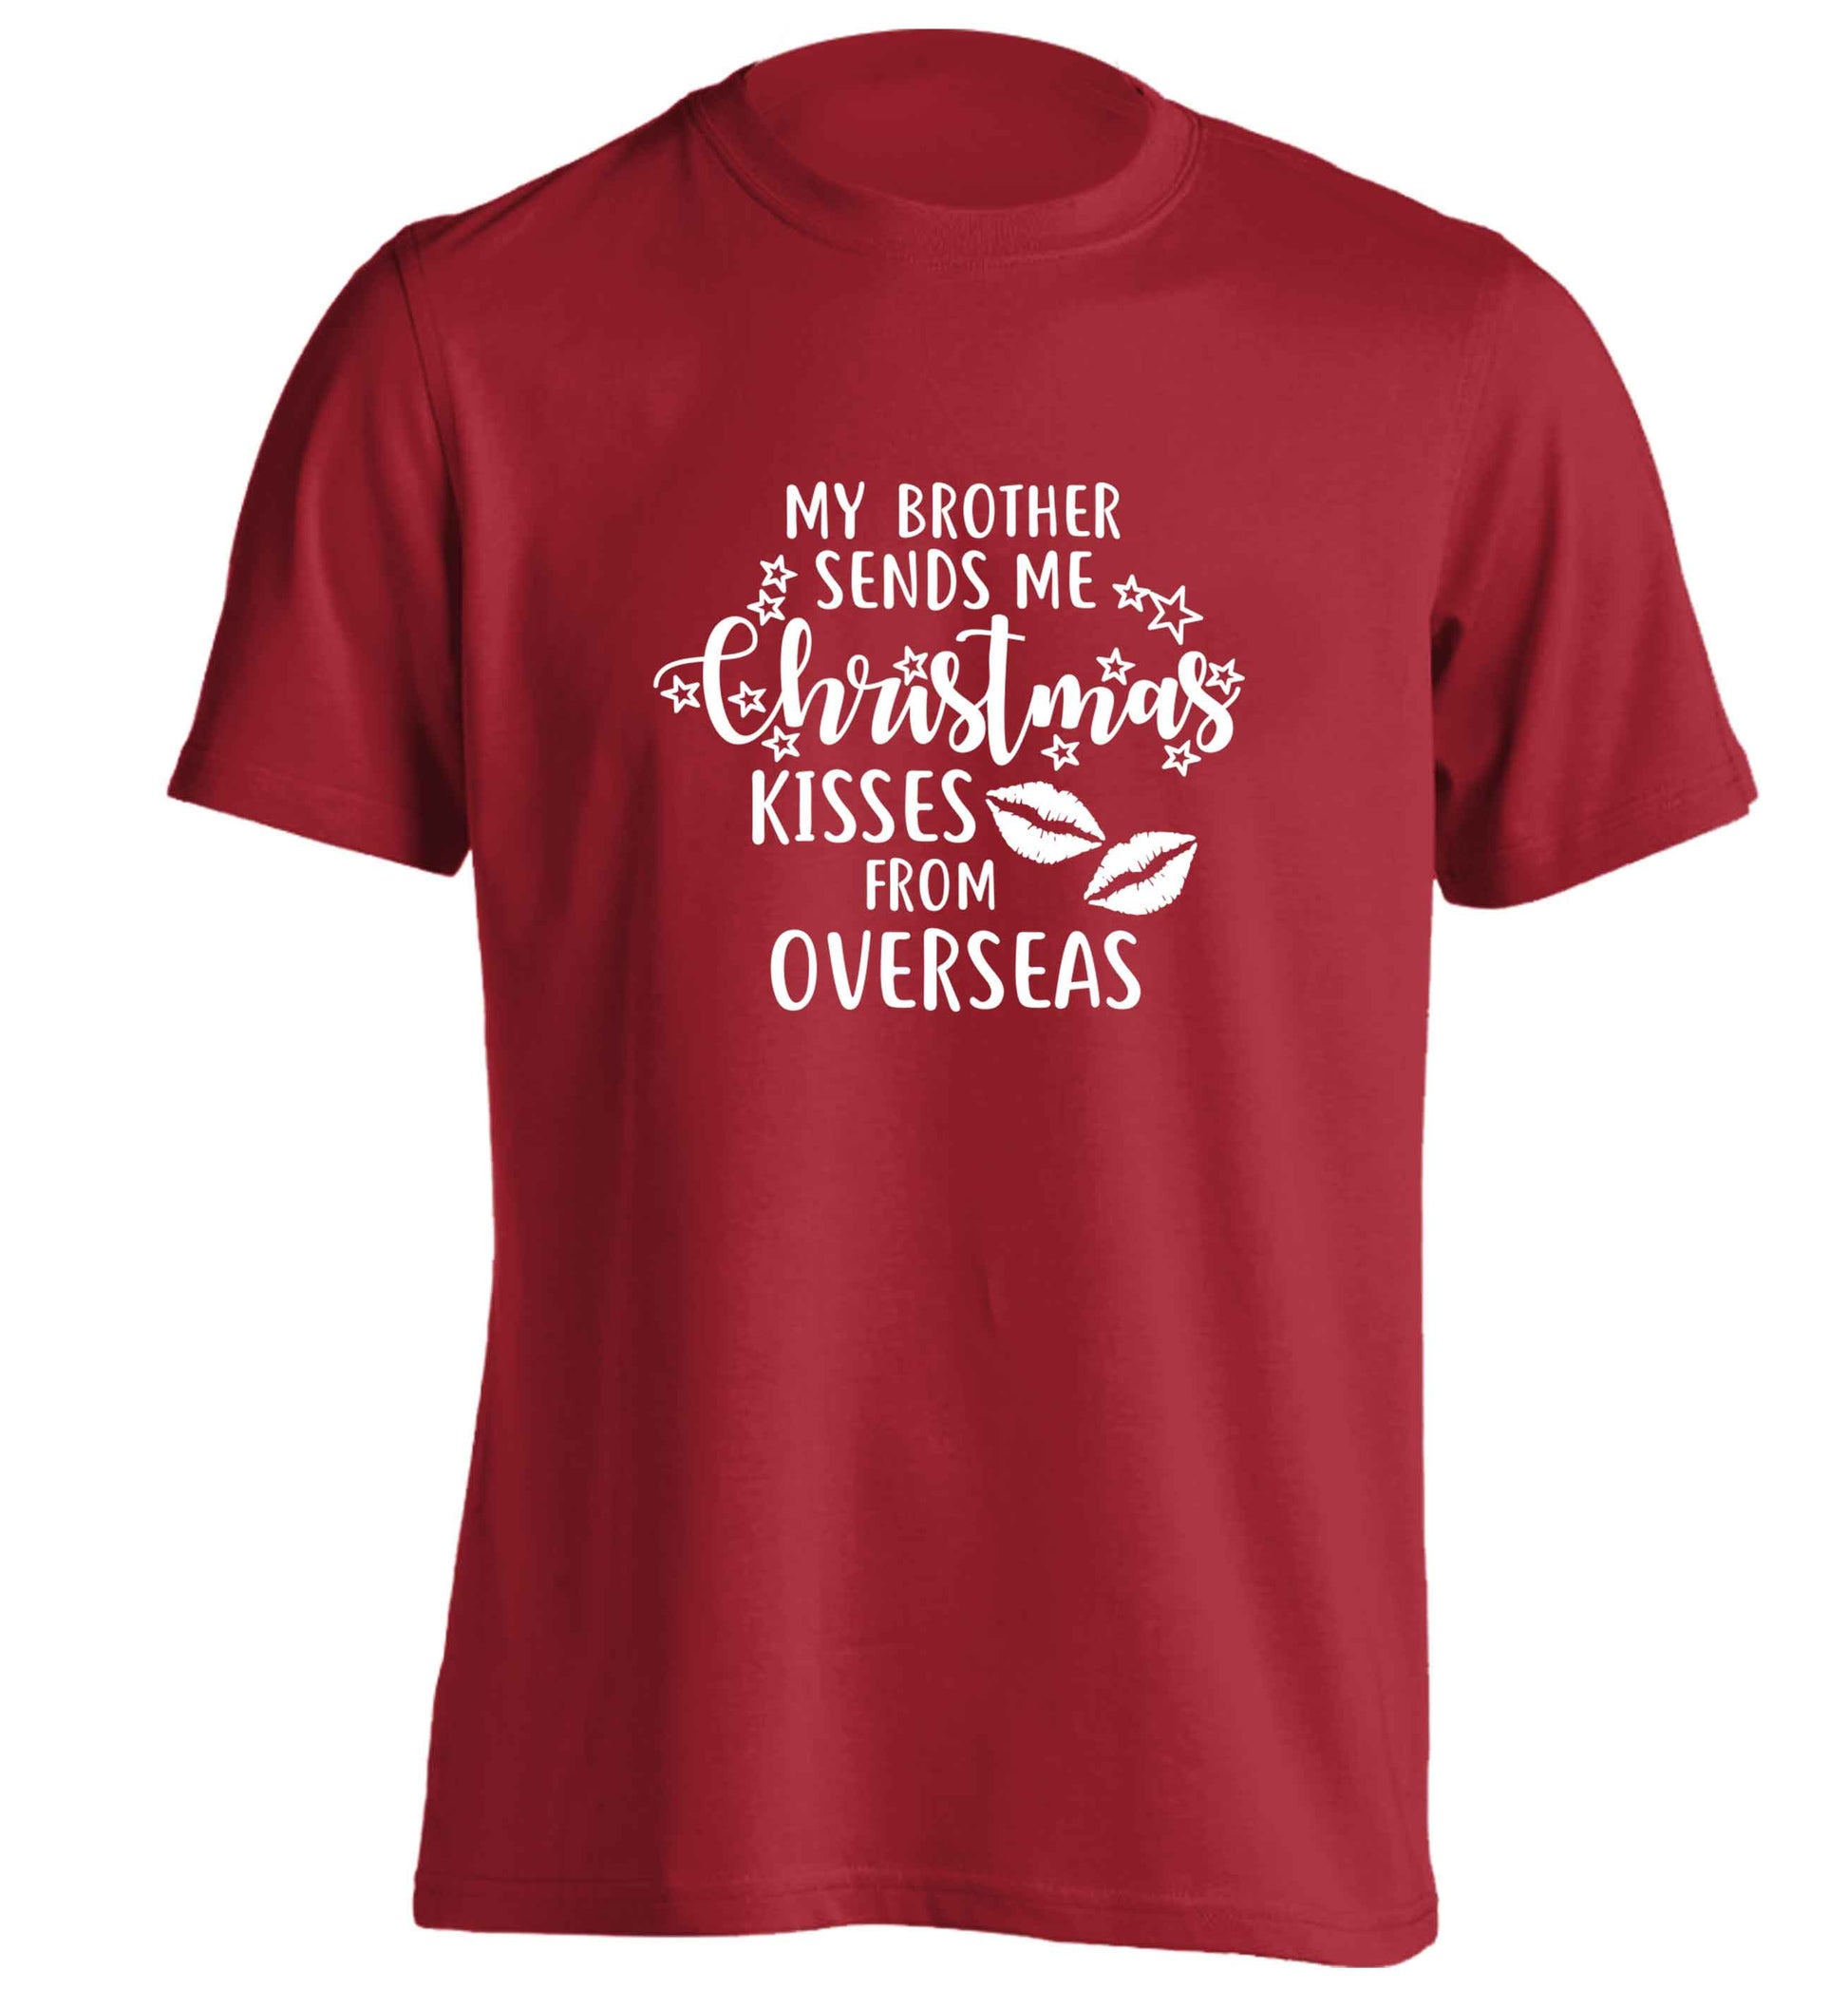 Brother Christmas Kisses Overseas adults unisex red Tshirt 2XL